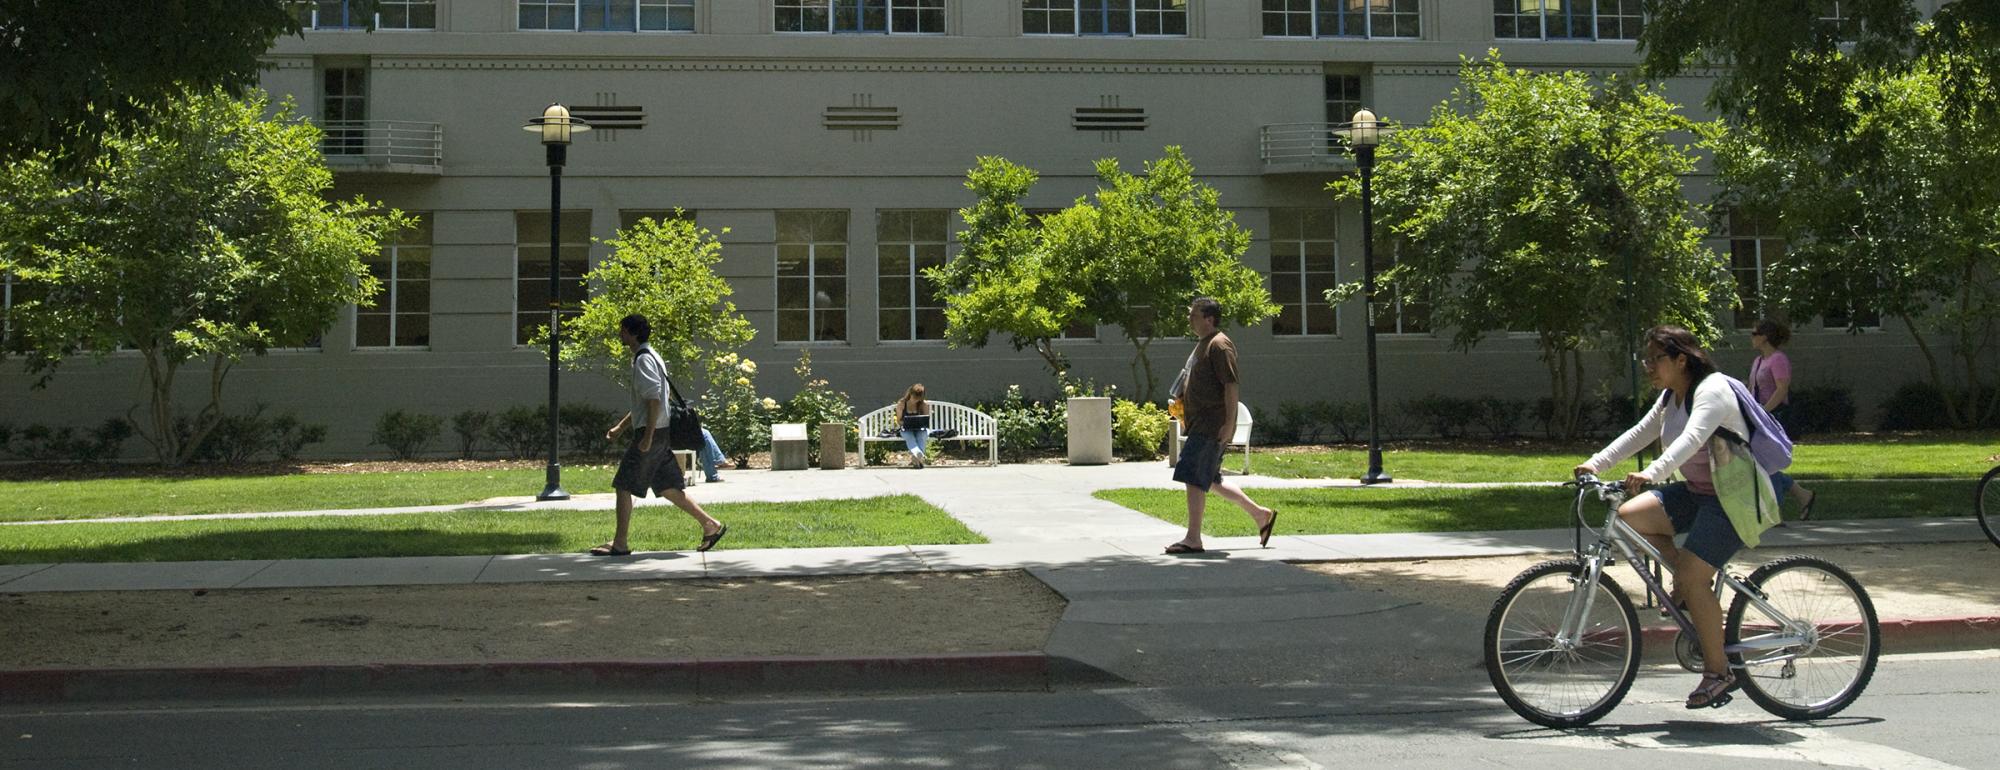 students walking and riding a bike on campus